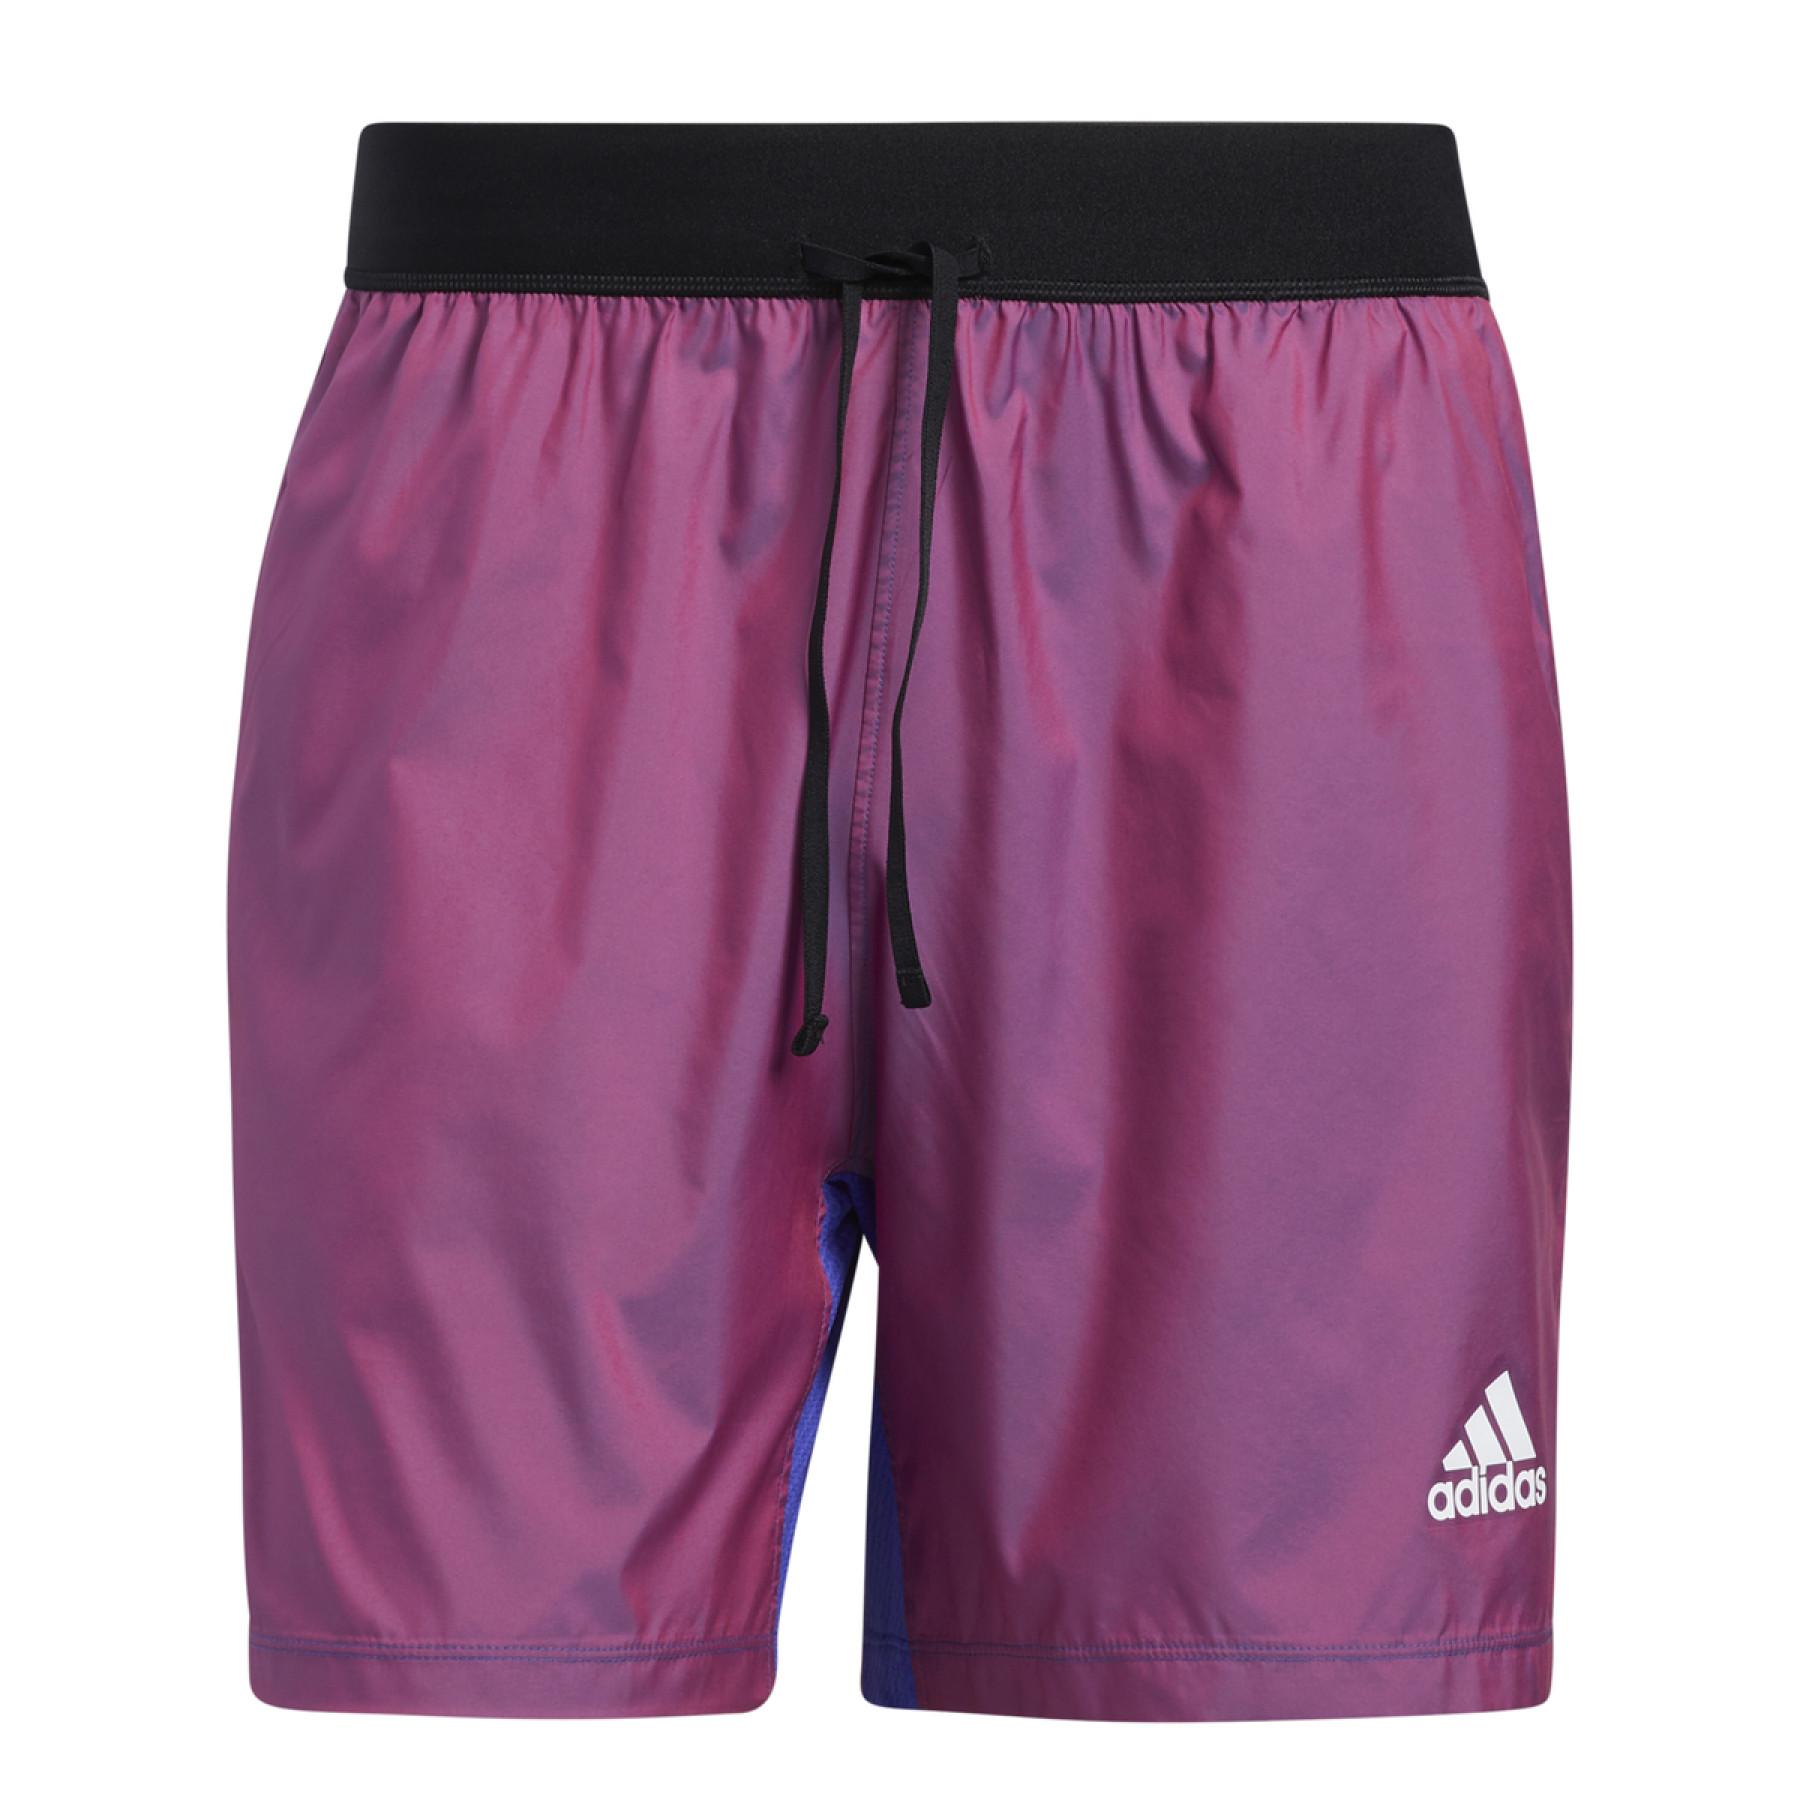 Pantaloncini adidas For The Oceans Primeblue 6-Inch